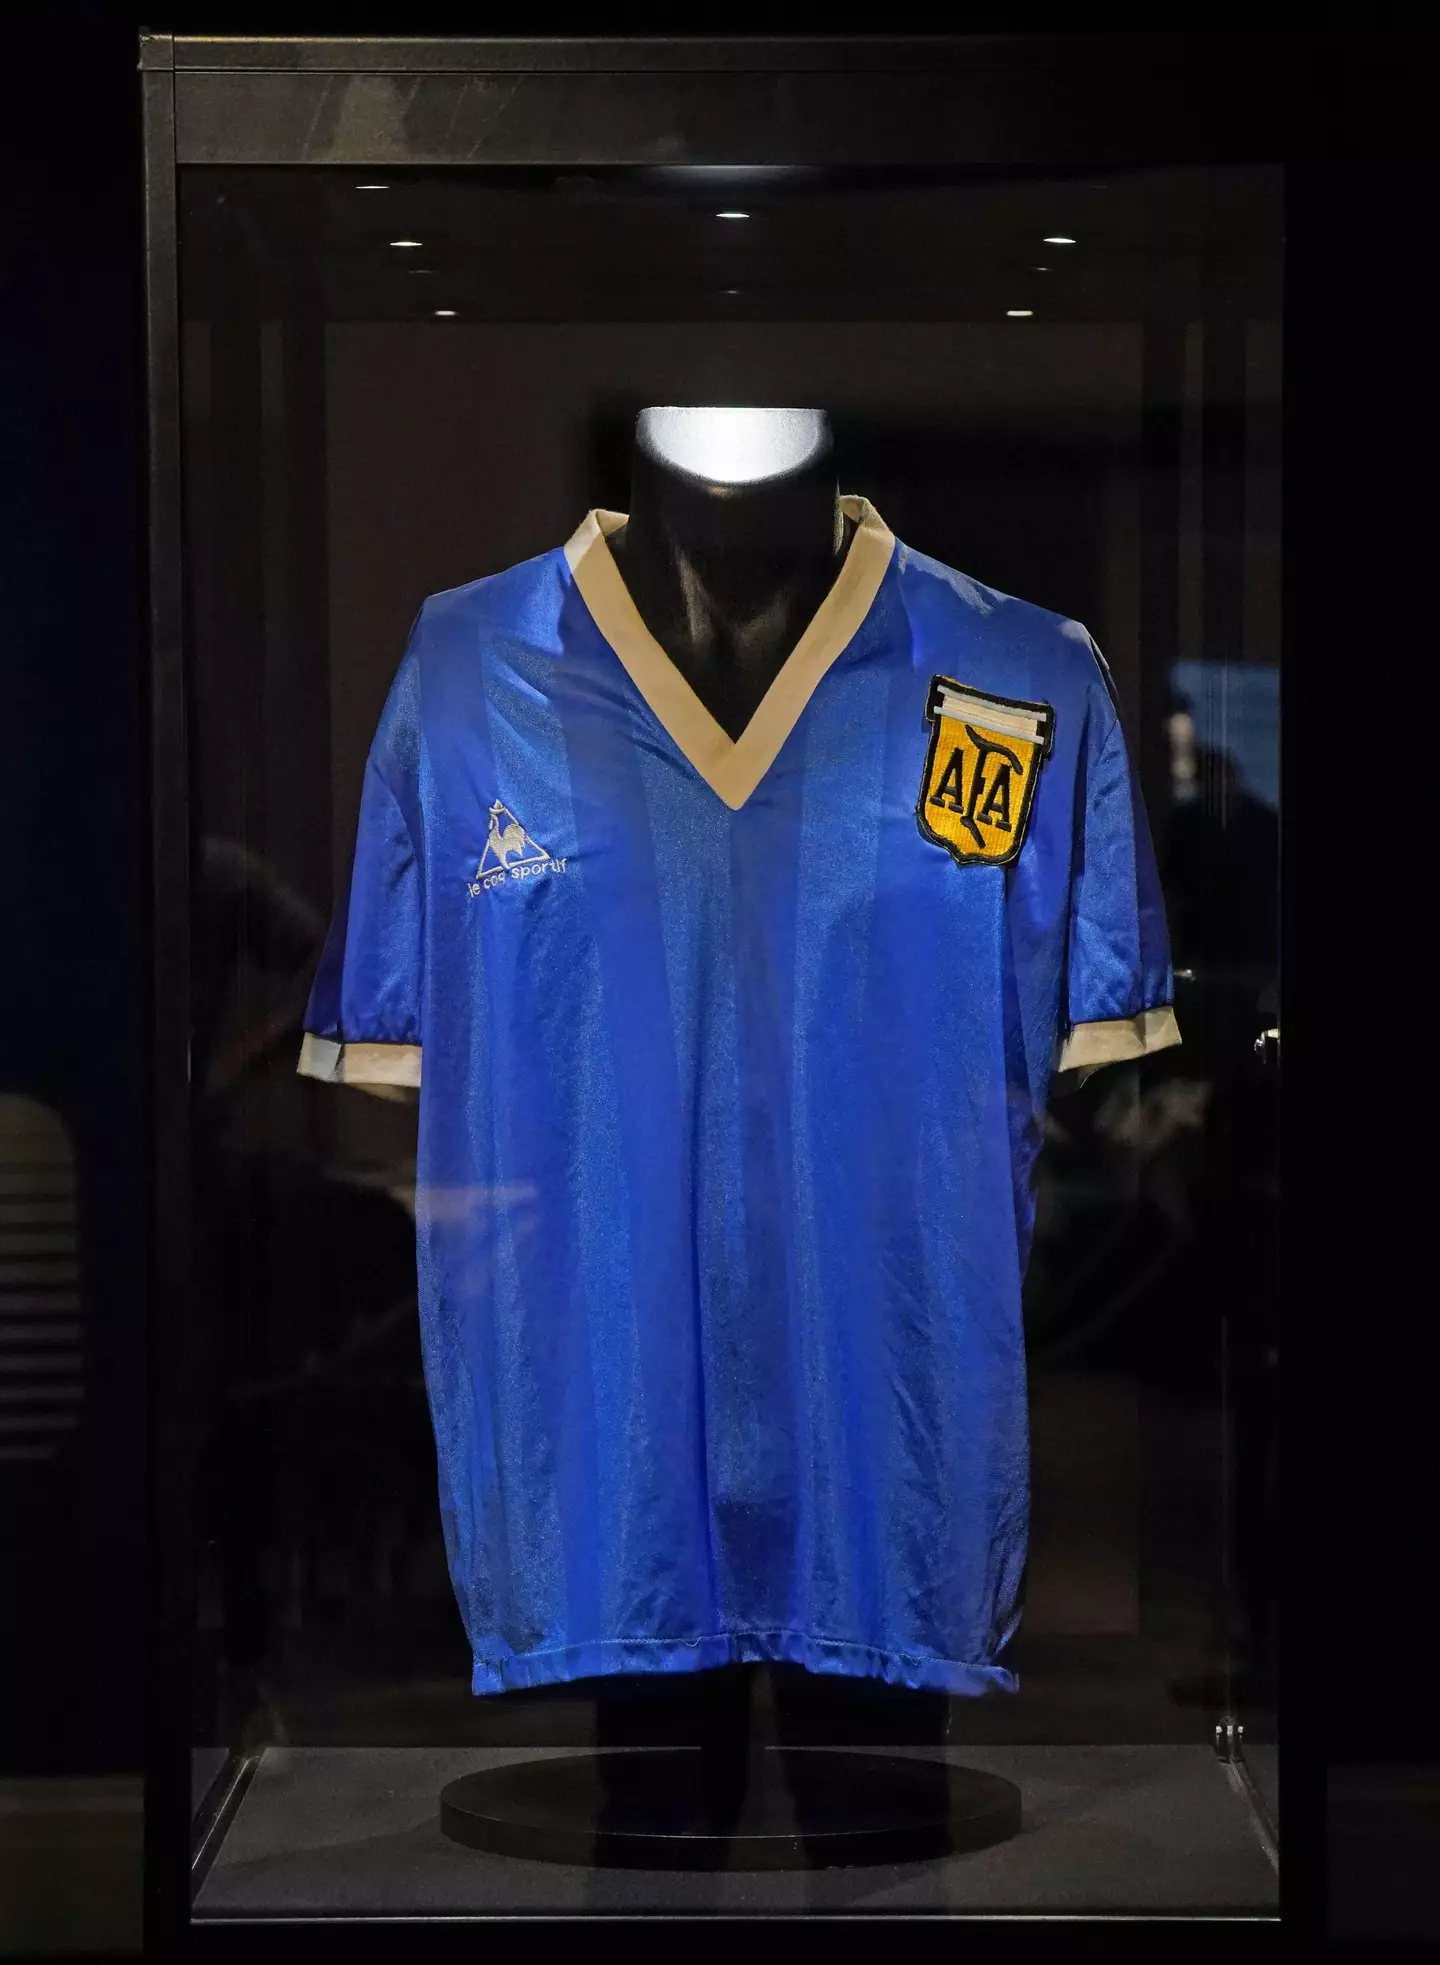 The shirt sold for £7.1m at auction.